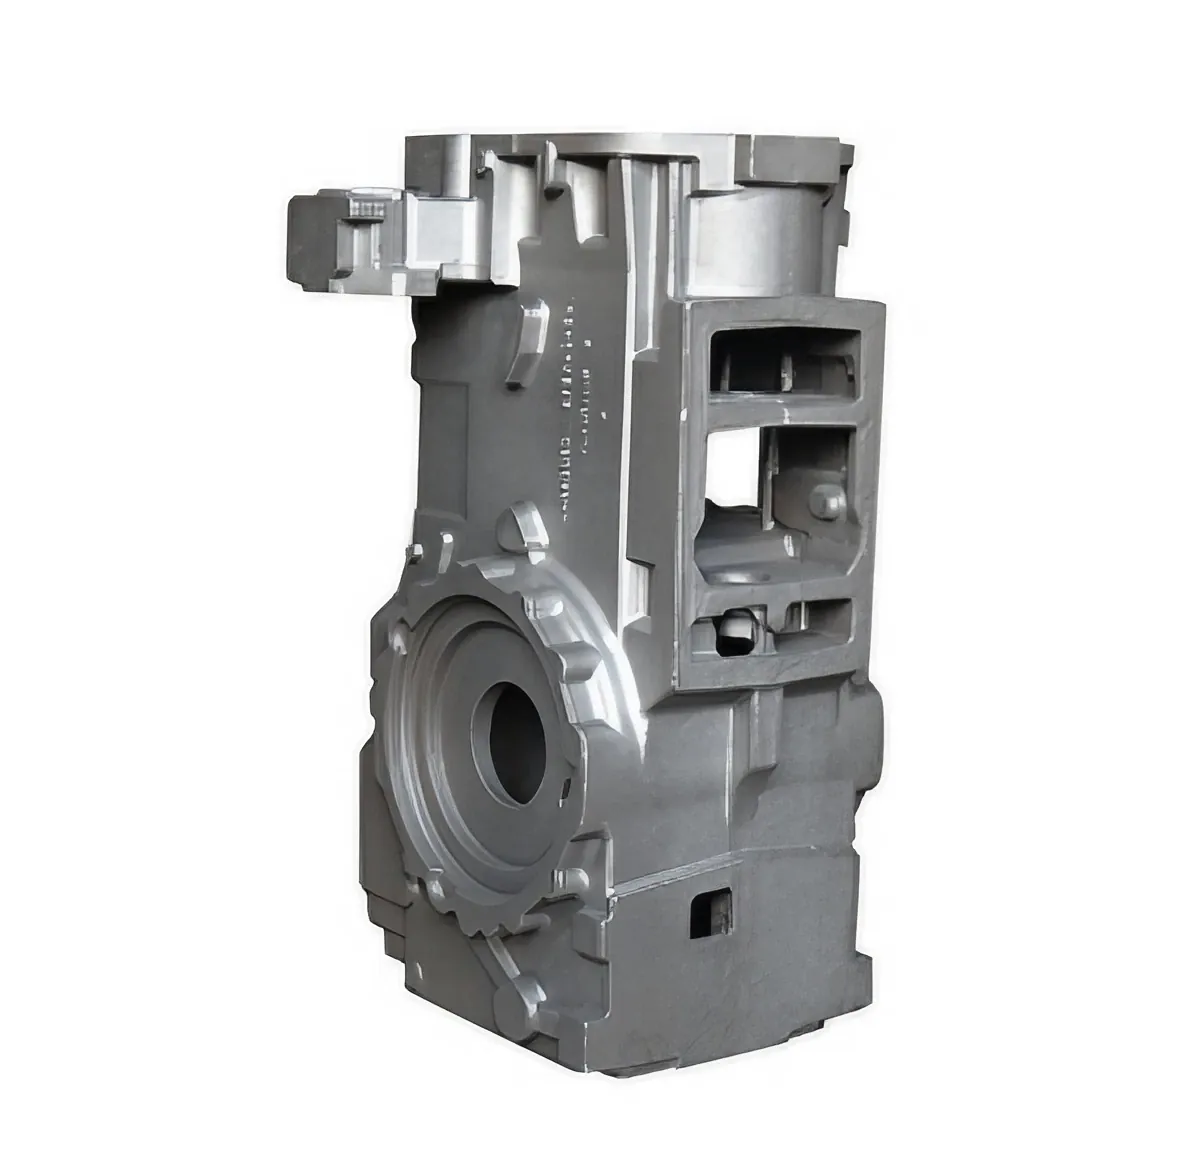 High-Performance Transmission Housing Castings